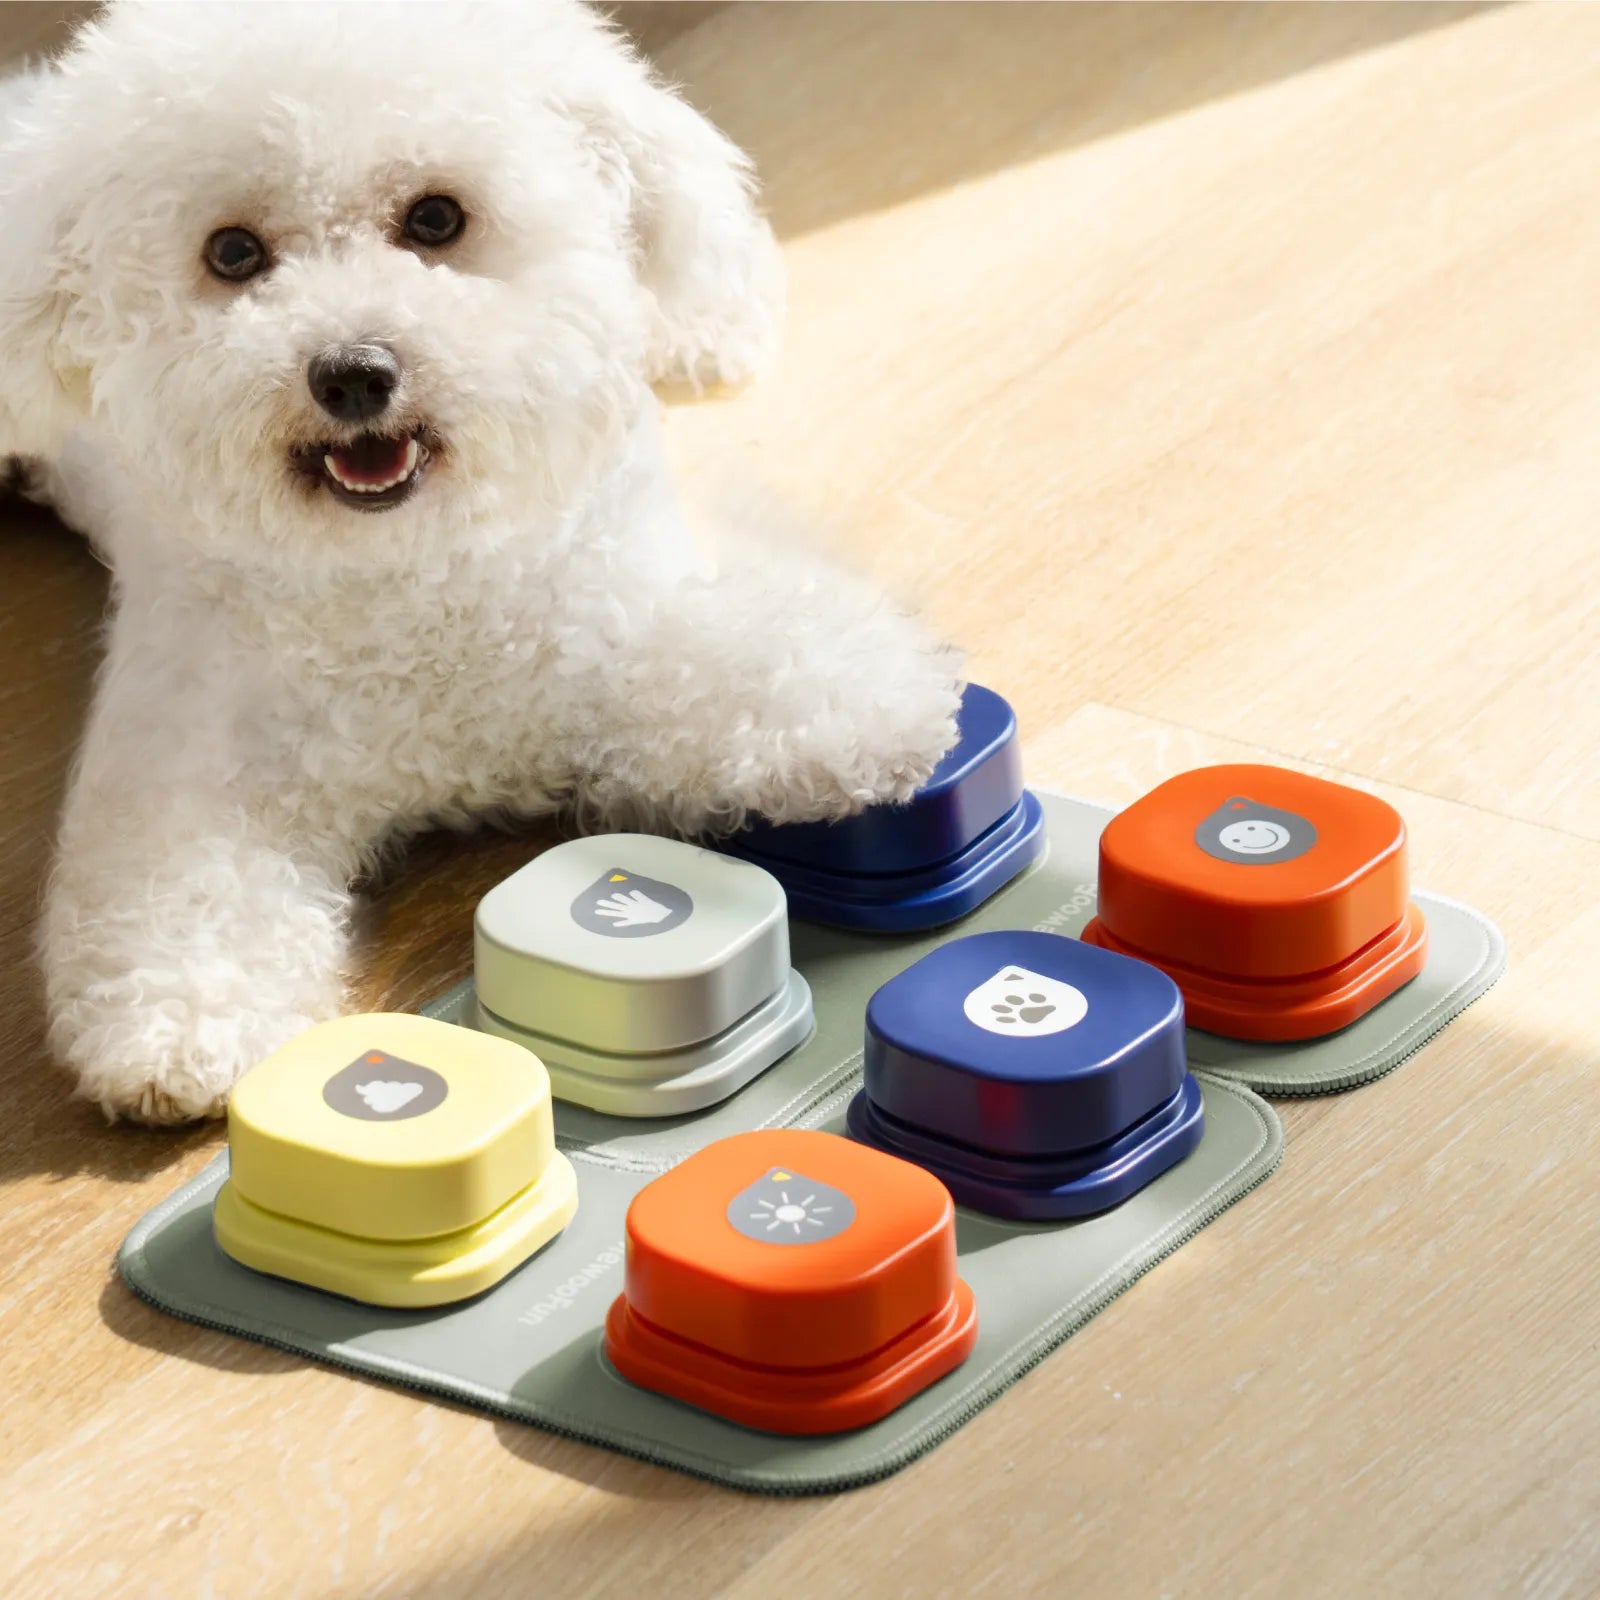 Buttons For Dogs To Talk